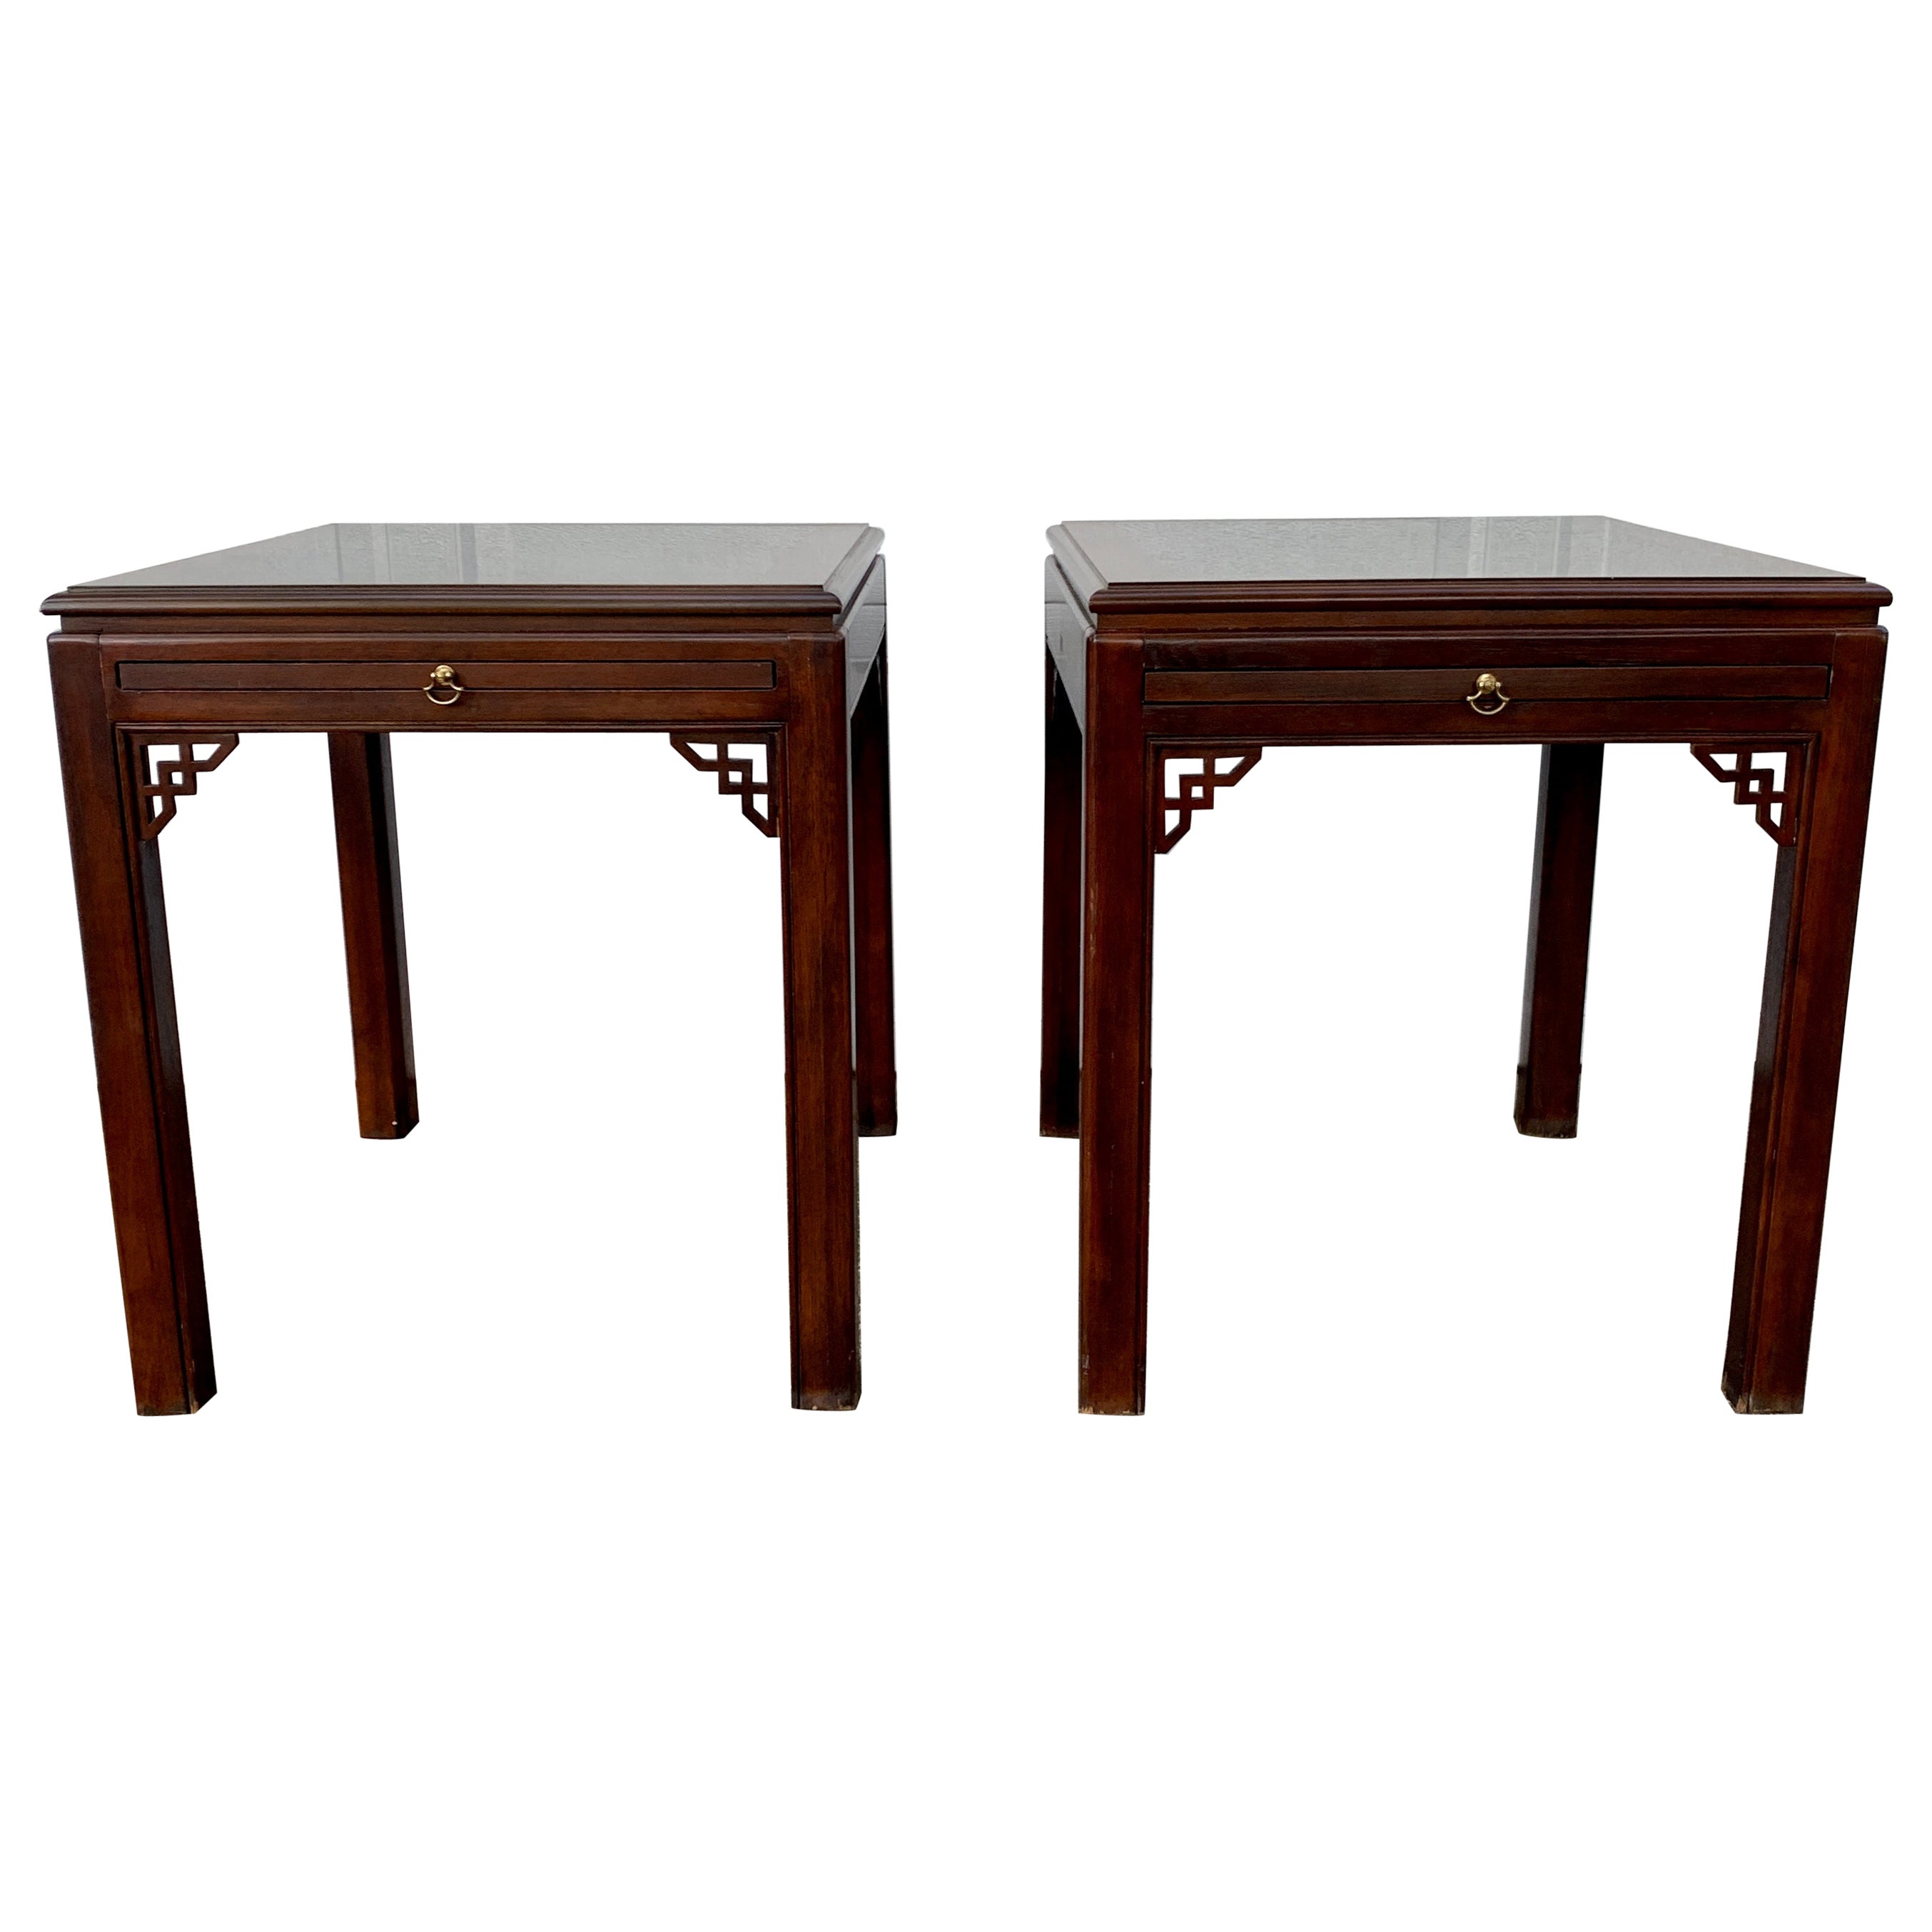 Drexel Heritage English Chippendale Banded Mahogany Side Tables, Pair For Sale